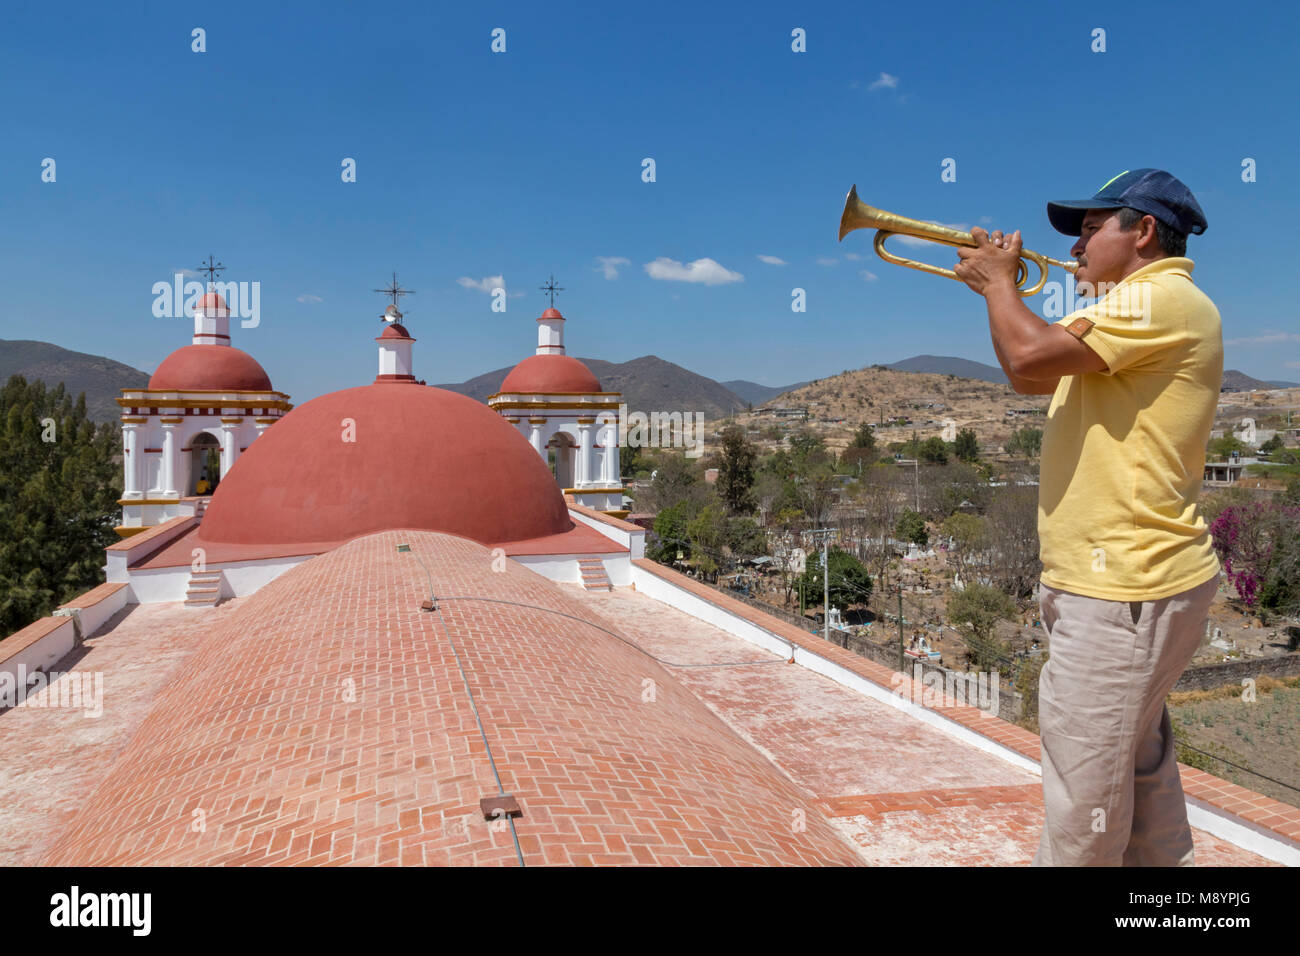 San Juan Teitipac, Oaxaca, Mexico - A man plays a bugle on the roof of the 16th century Dominican church in a small Zapotec town. Stock Photo